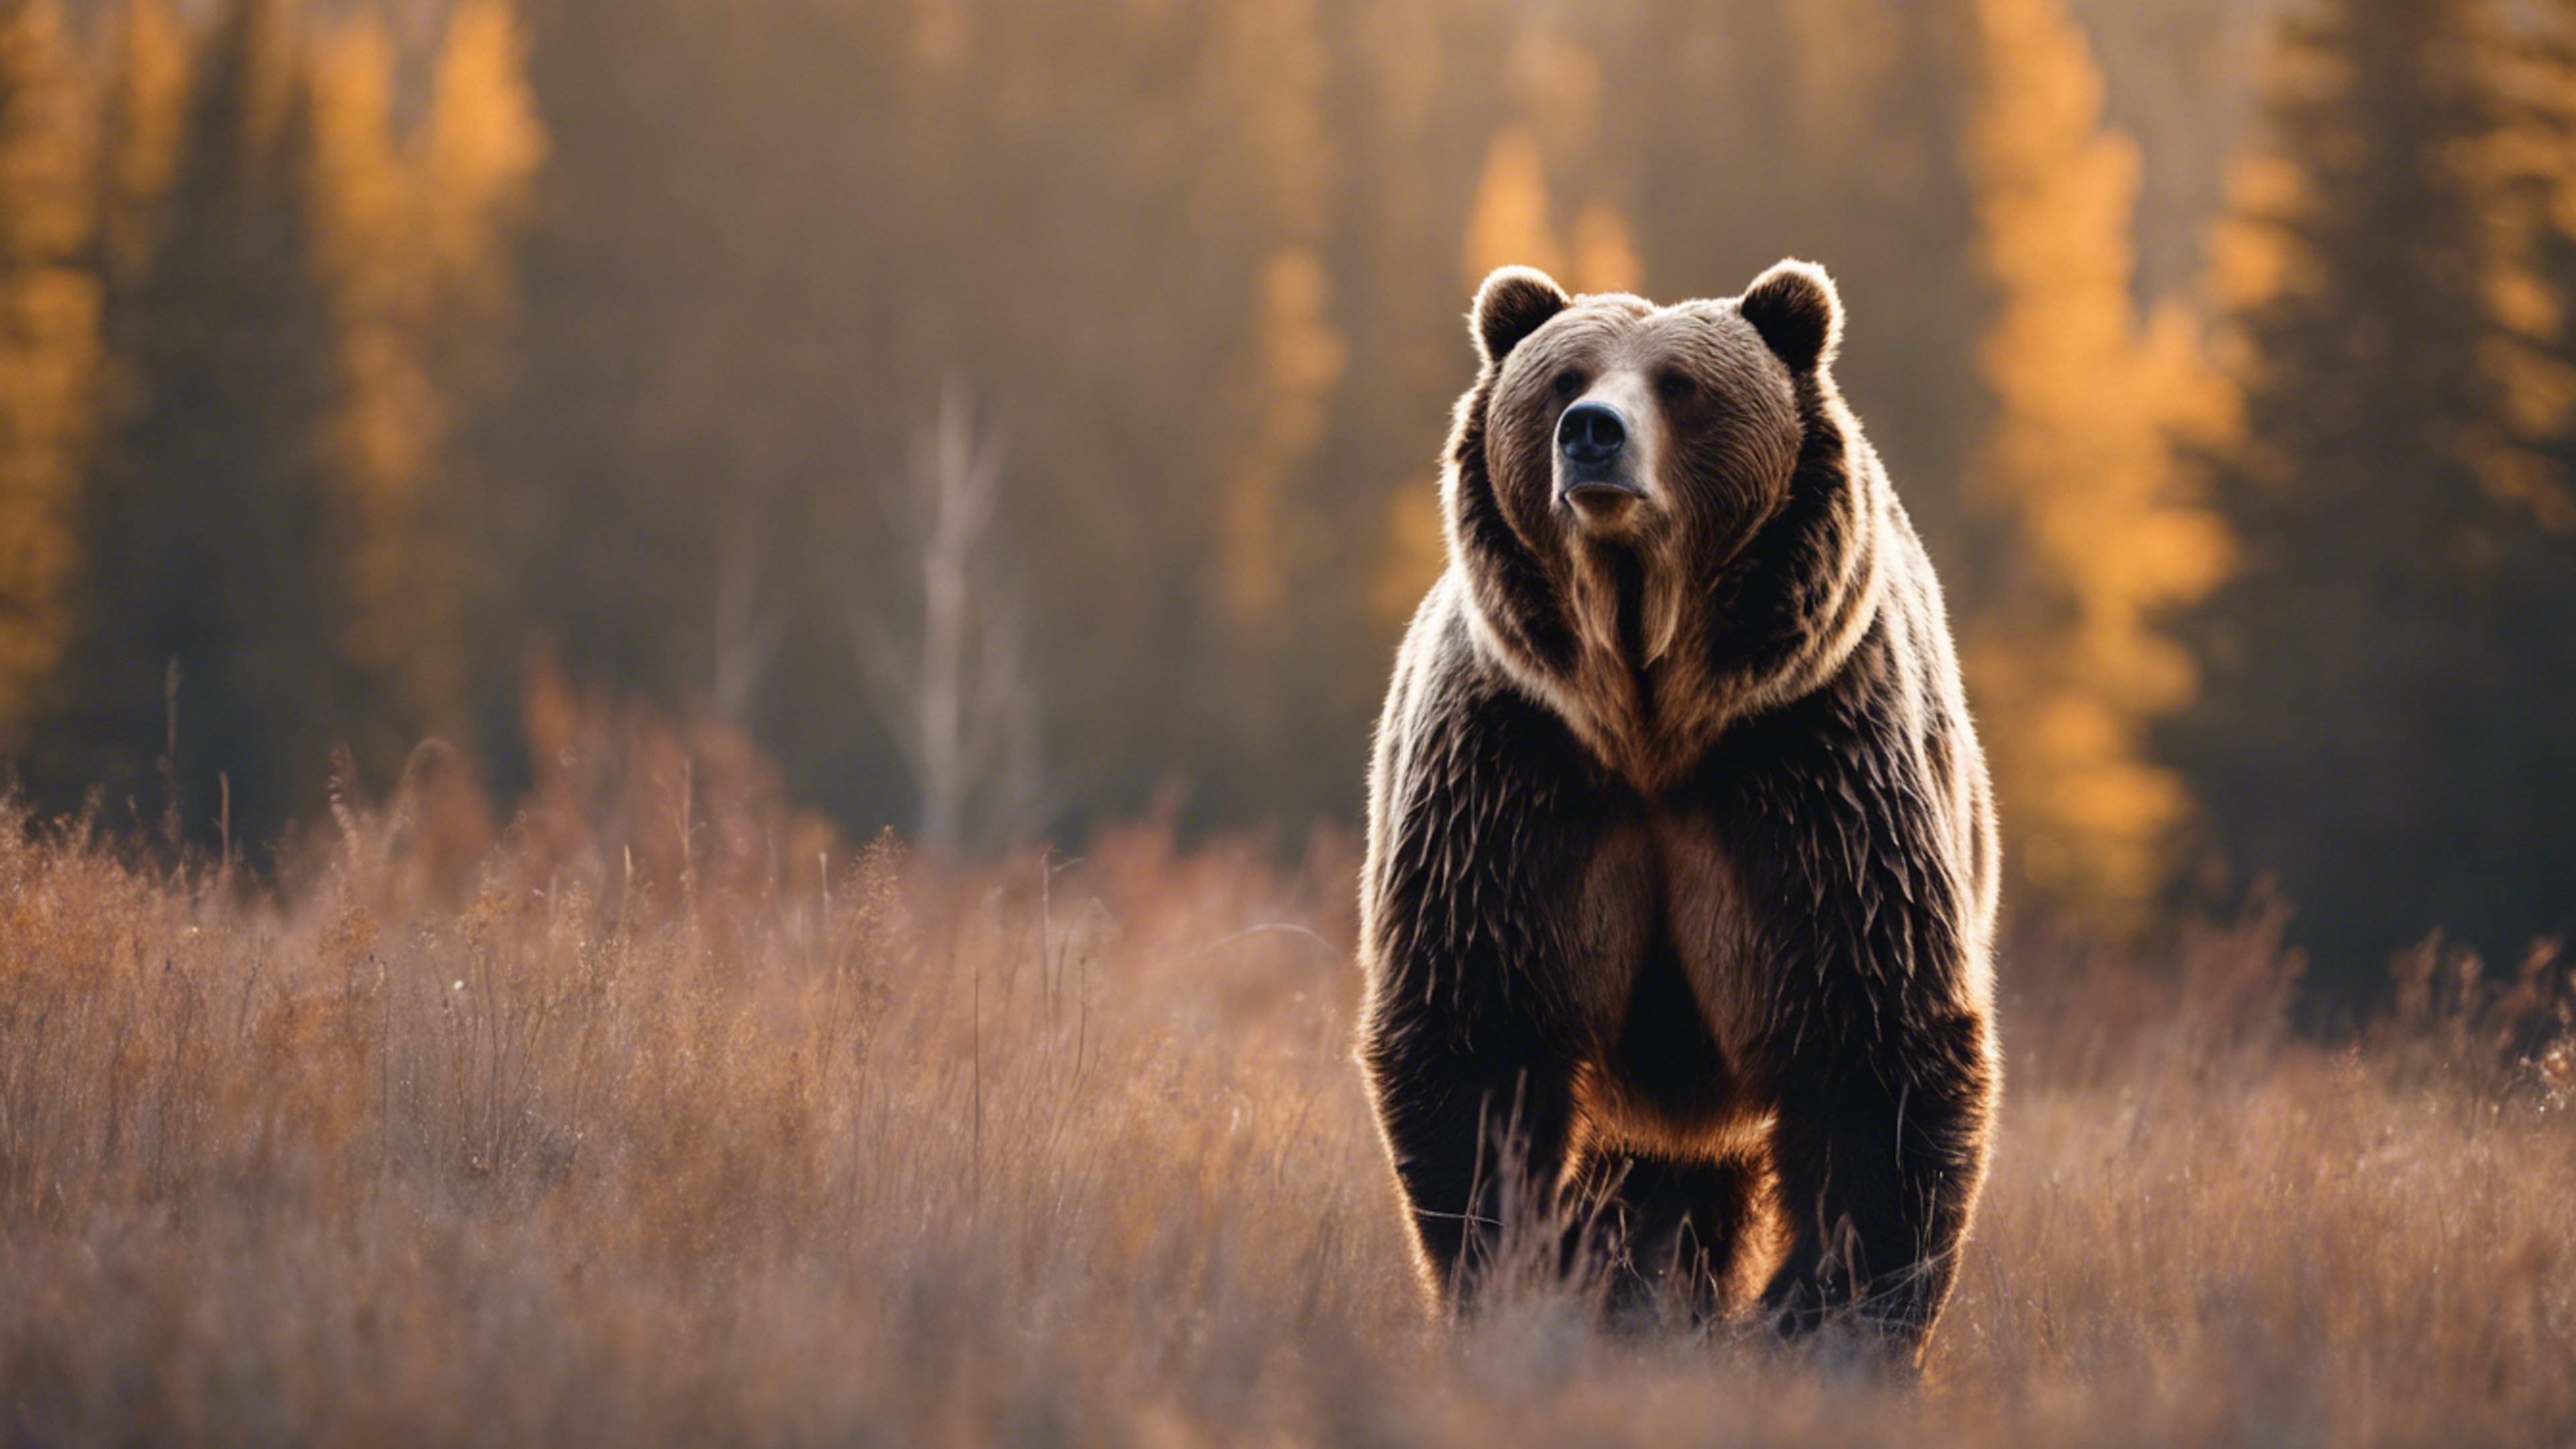 A majestic brown grizzly bear standing tall in the wild壁紙[4fb1e3b24f2c4984aff0]